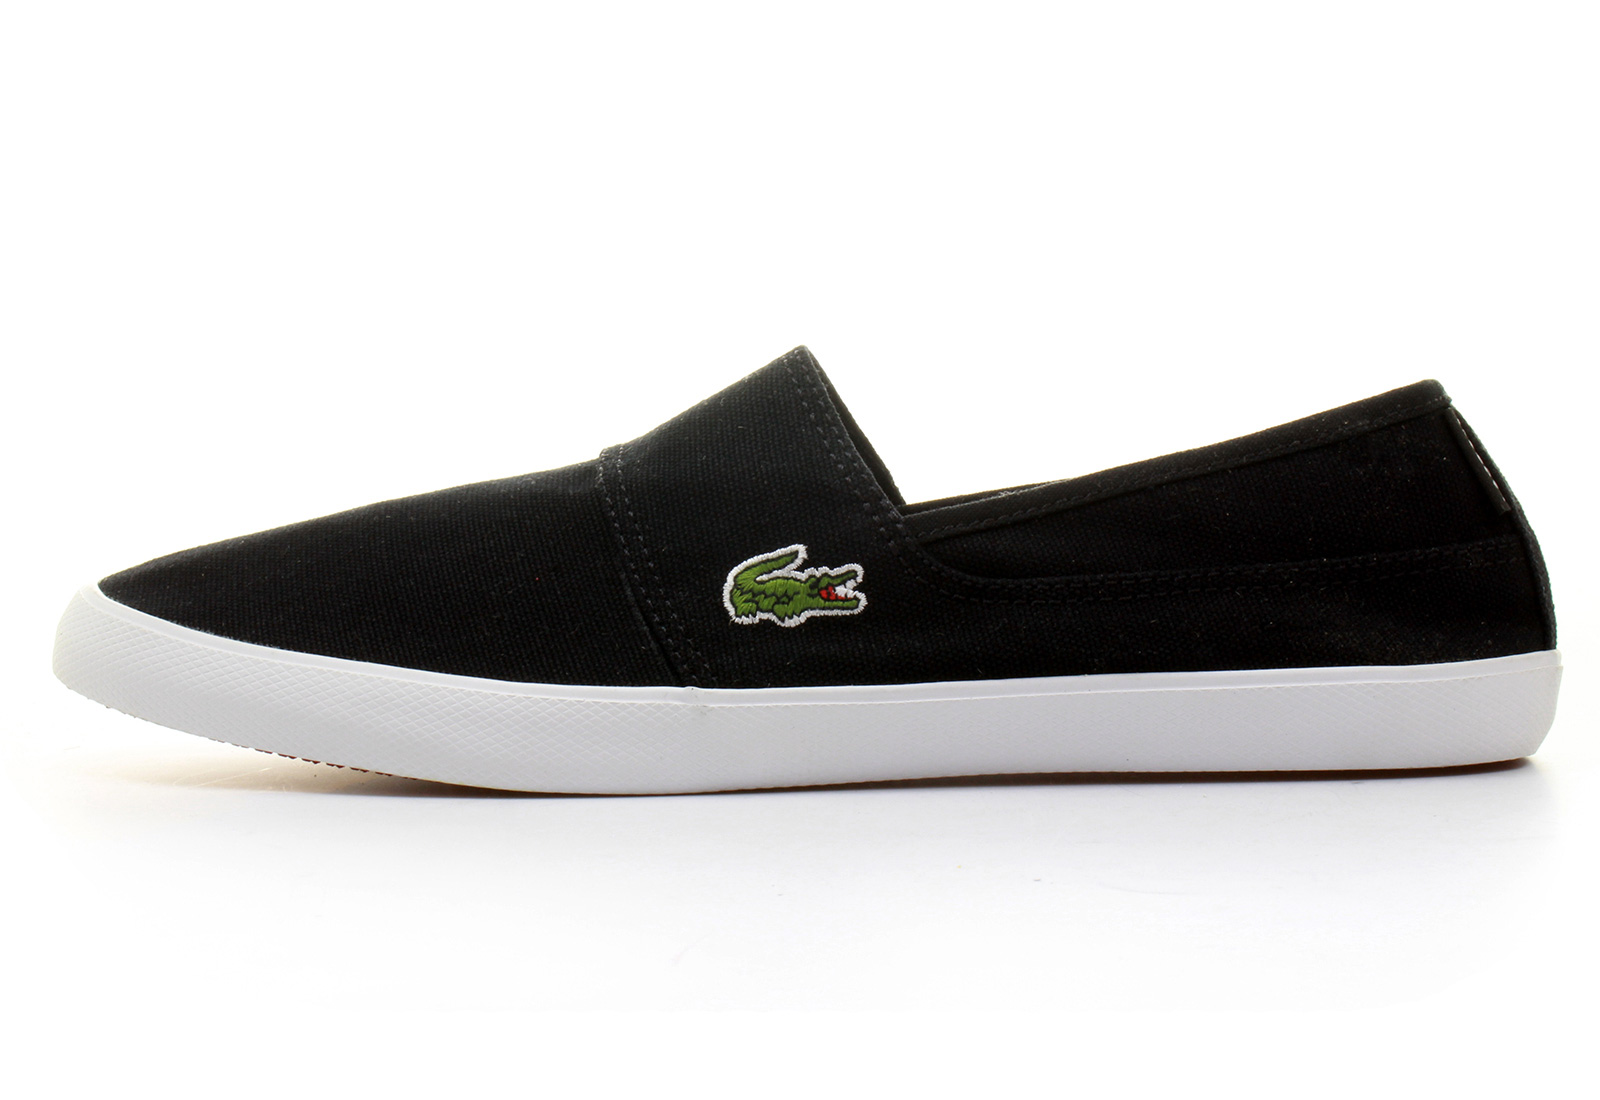 Lacoste Slip-ons - Marice - 141spm1082-02h - Online shop for sneakers ...